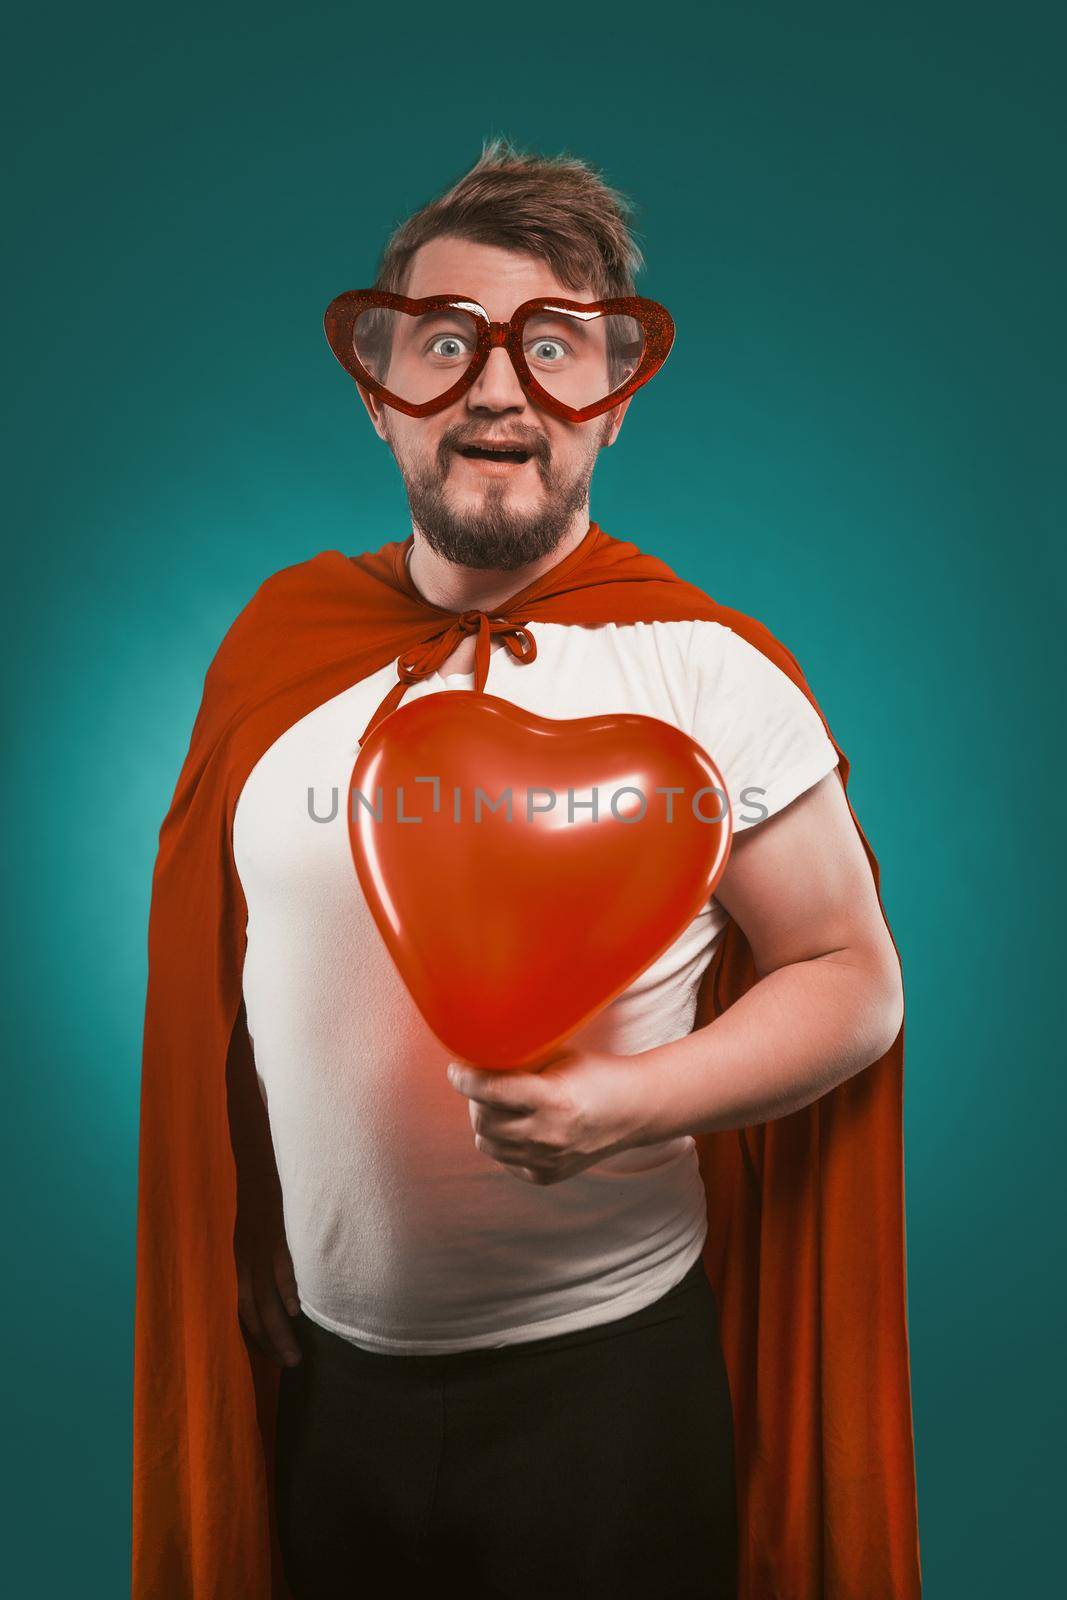 Superman In Love Holds Big Red Heart. Positive Man In Superhero Costume And Heart-Shaped Glasses Poses On Biscay Green Background. Valentine's day concept by LipikStockMedia